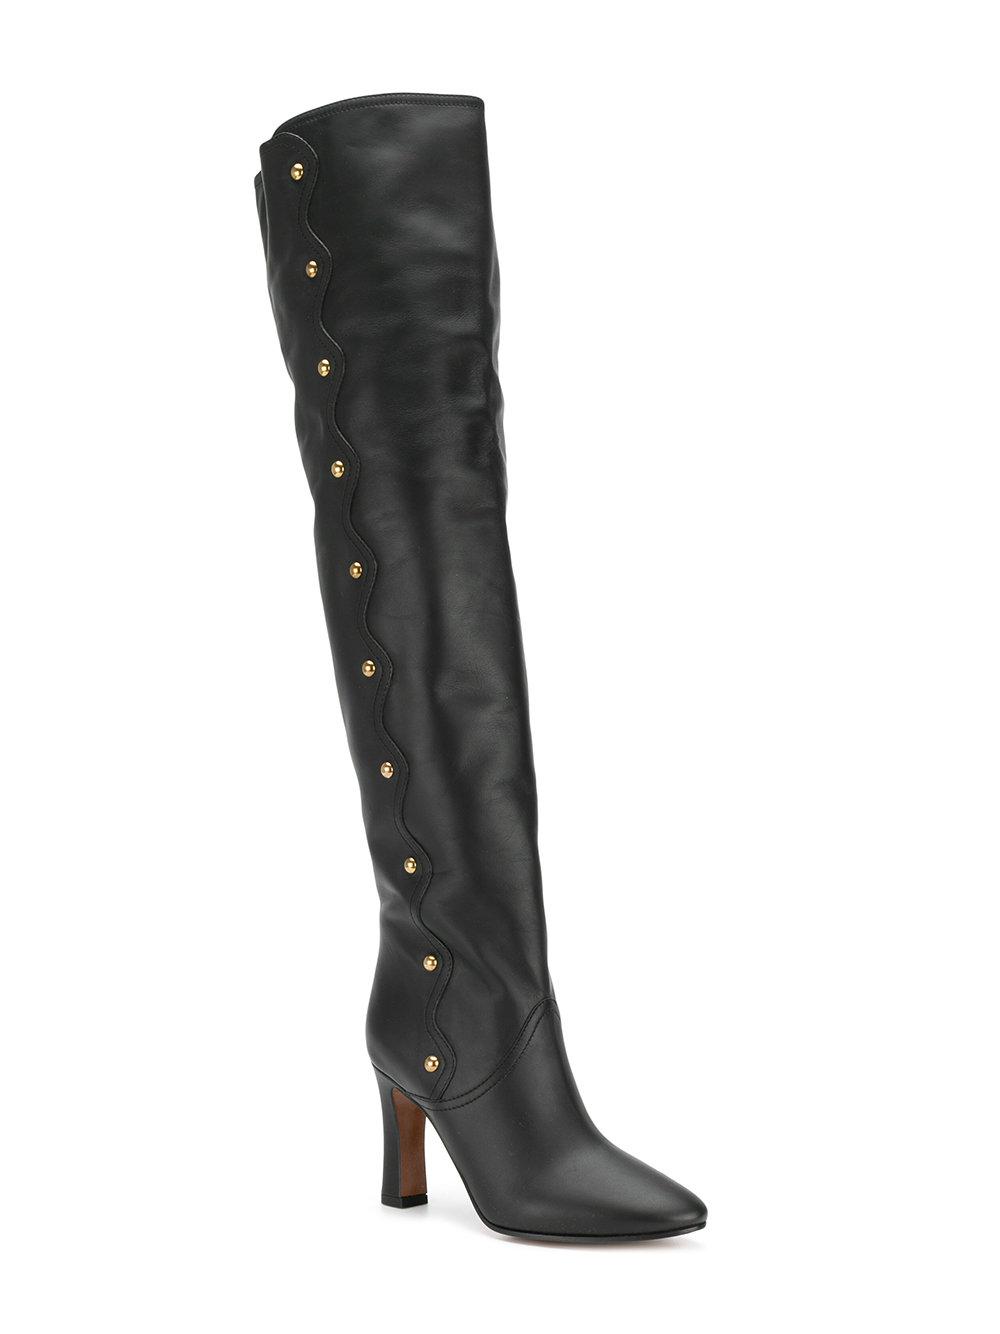 Chloé Quaylee Over-the-knee Boots in Black - Lyst